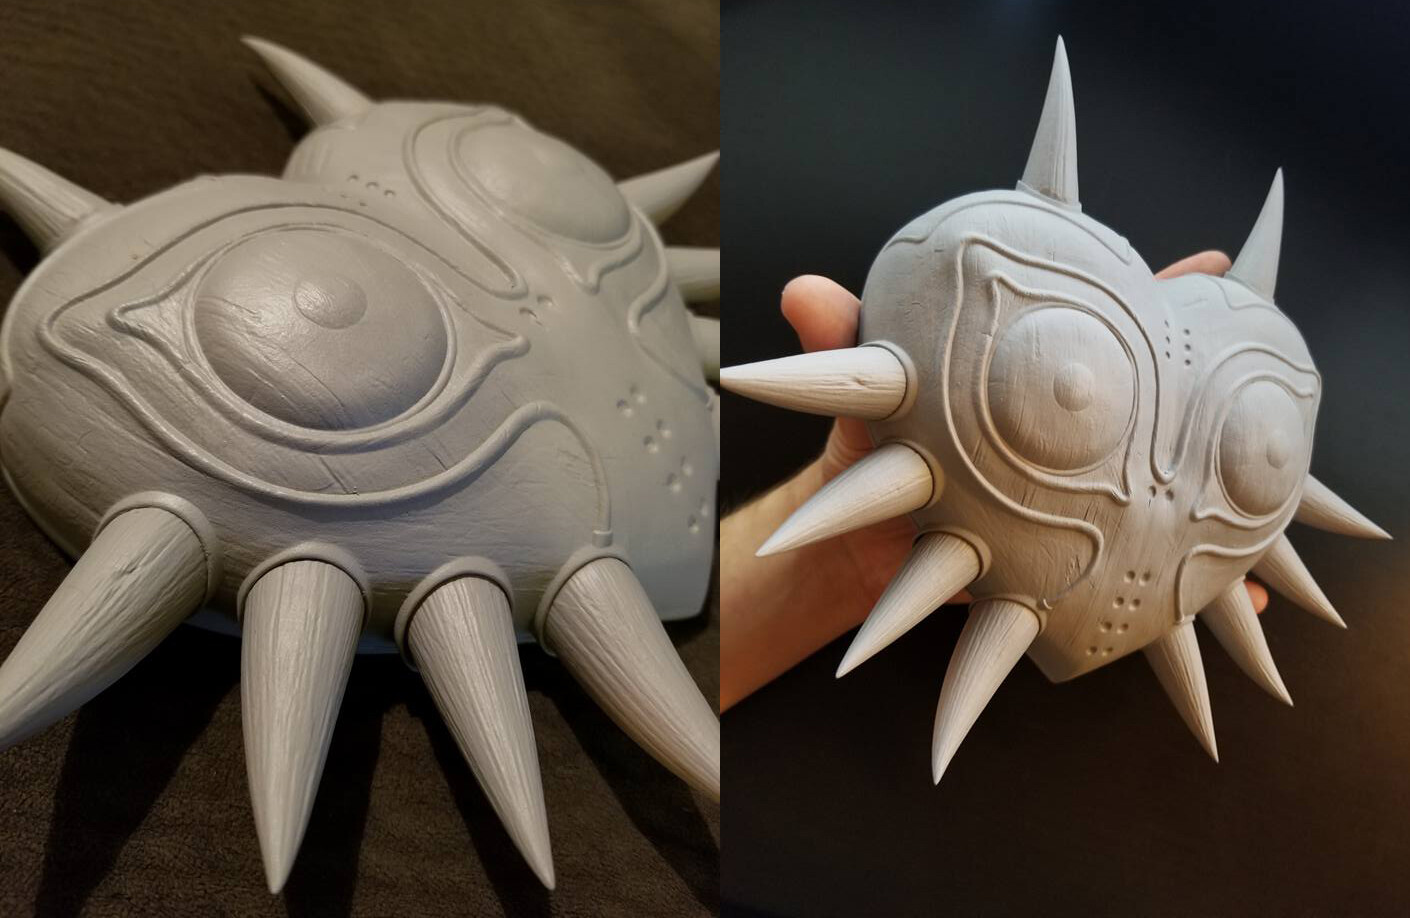 I 3d printed the mask a couple years ago also. Maybe one day I'll make a master mold and sell some copies.